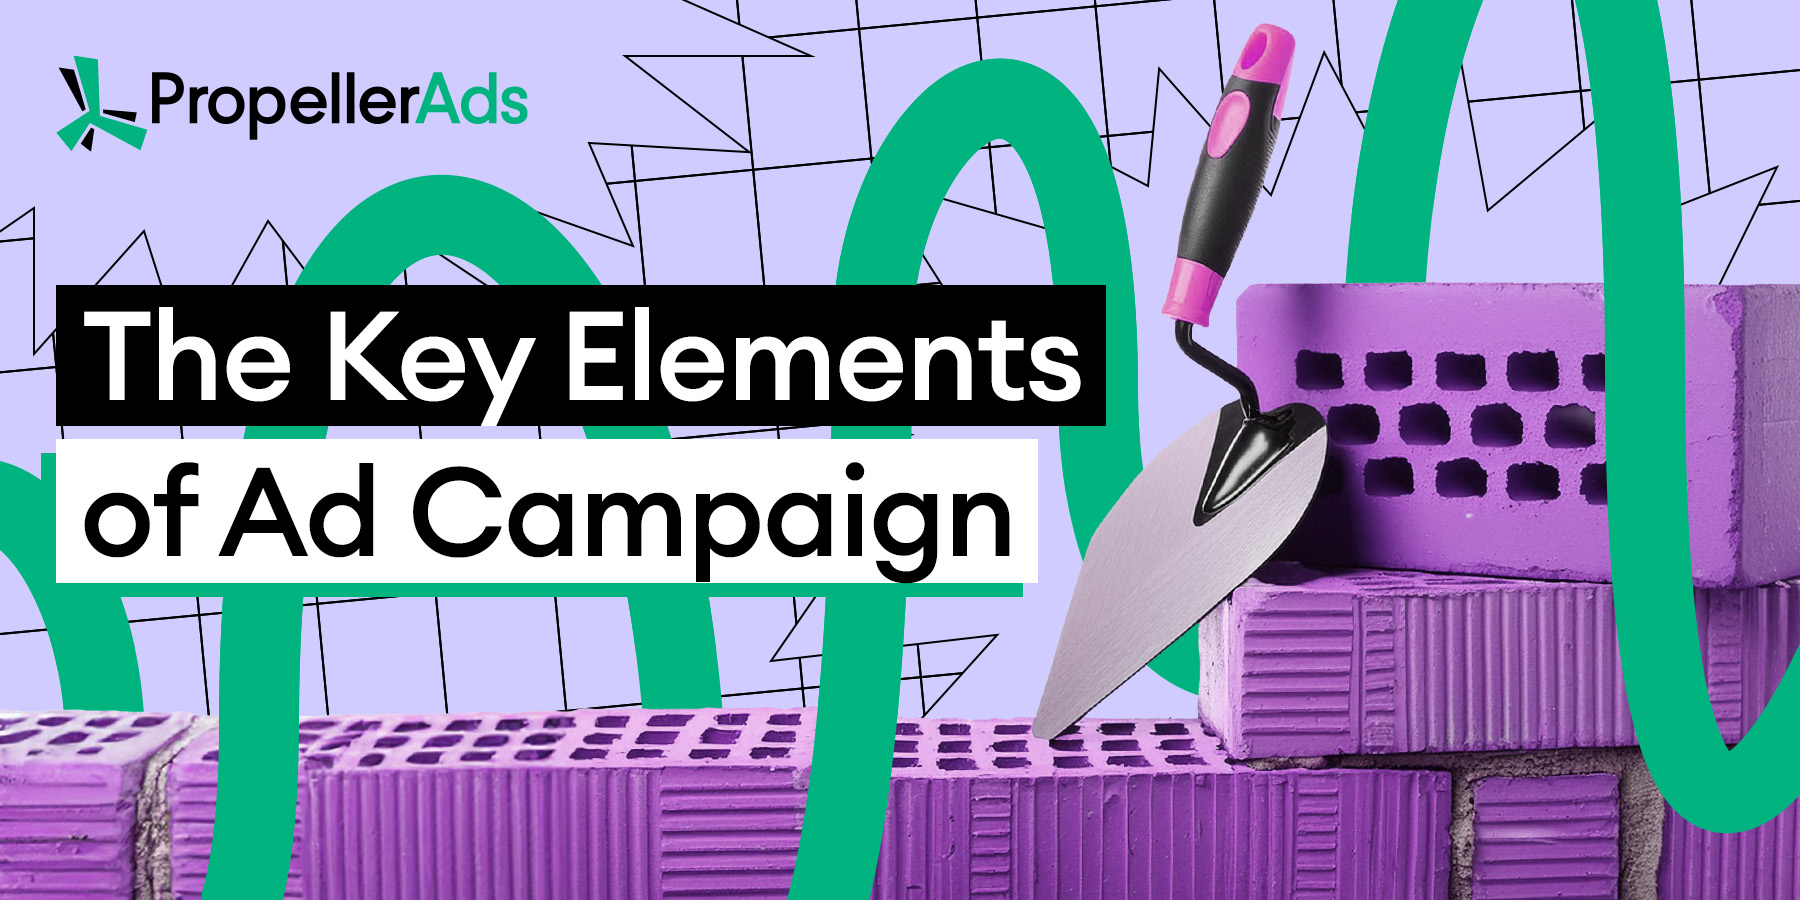 Key elements of ad campaigns